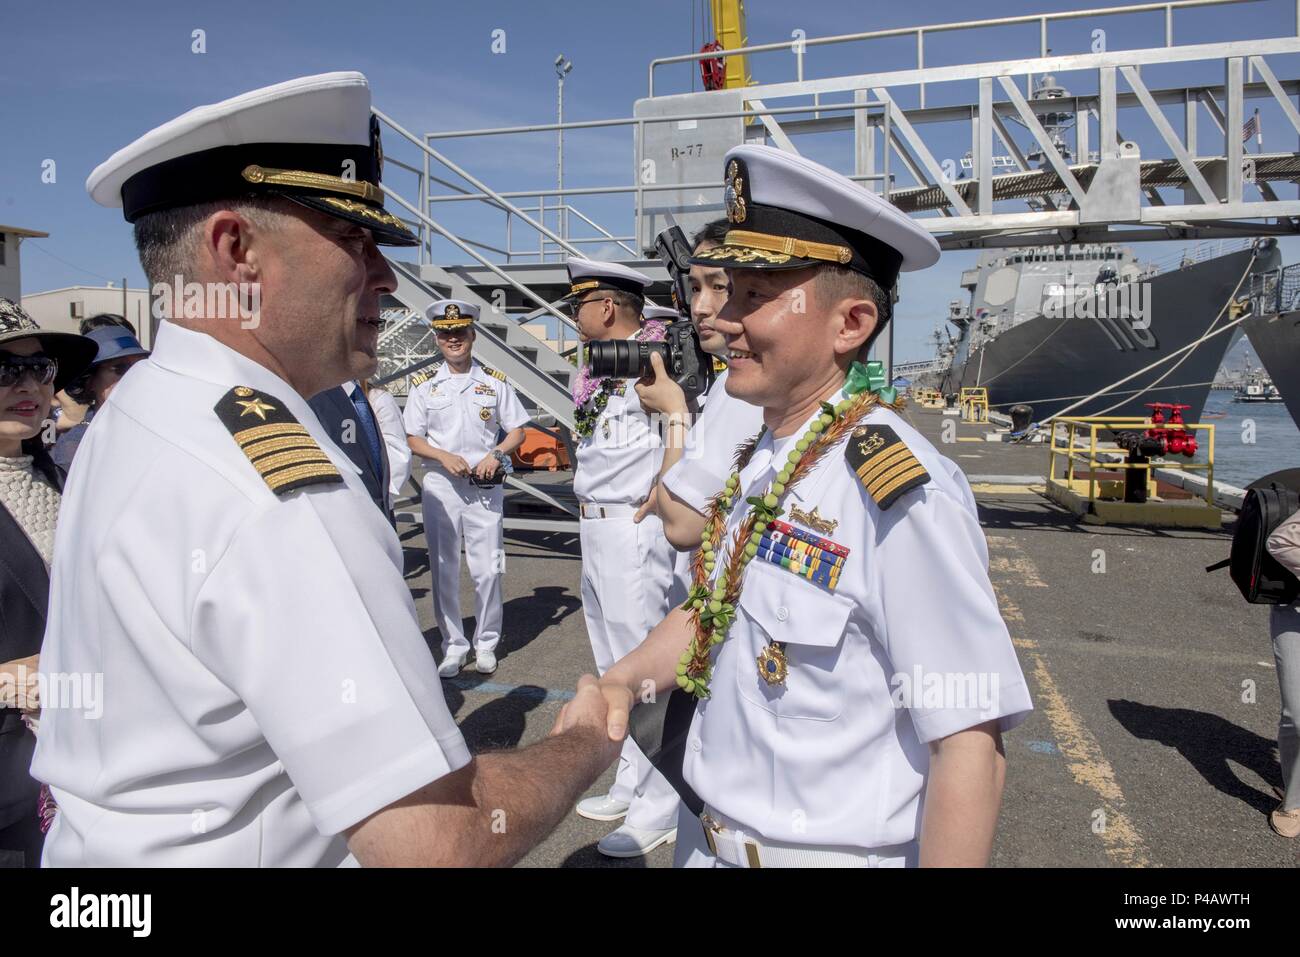 180608-N-QE566-0007 PEARL HARBOR -- (June 8, 2018) Capt. Christopher J. Budde, commanding officer, USS Port Royal (CG 73), left, welcomes Capt. In-Ho Kim, the commanding officer of the Republic of Korea Navy ship Yulgok Yi I (DDG 992), following the ship's arrival to Joint Base Pearl Harbor-Hickam June 8 in preparation for the Rim of the Pacific (RIMPAC) Exercise 2018, June 8, 2018. Twenty-six nations, 47 ships, five submarines, about 200 aircraft, and 25, 000 personnel are participating in RIMPAC from June 27 to Aug. 2 in and around the Hawaiian Islands and Southern California. The world's la Stock Photo